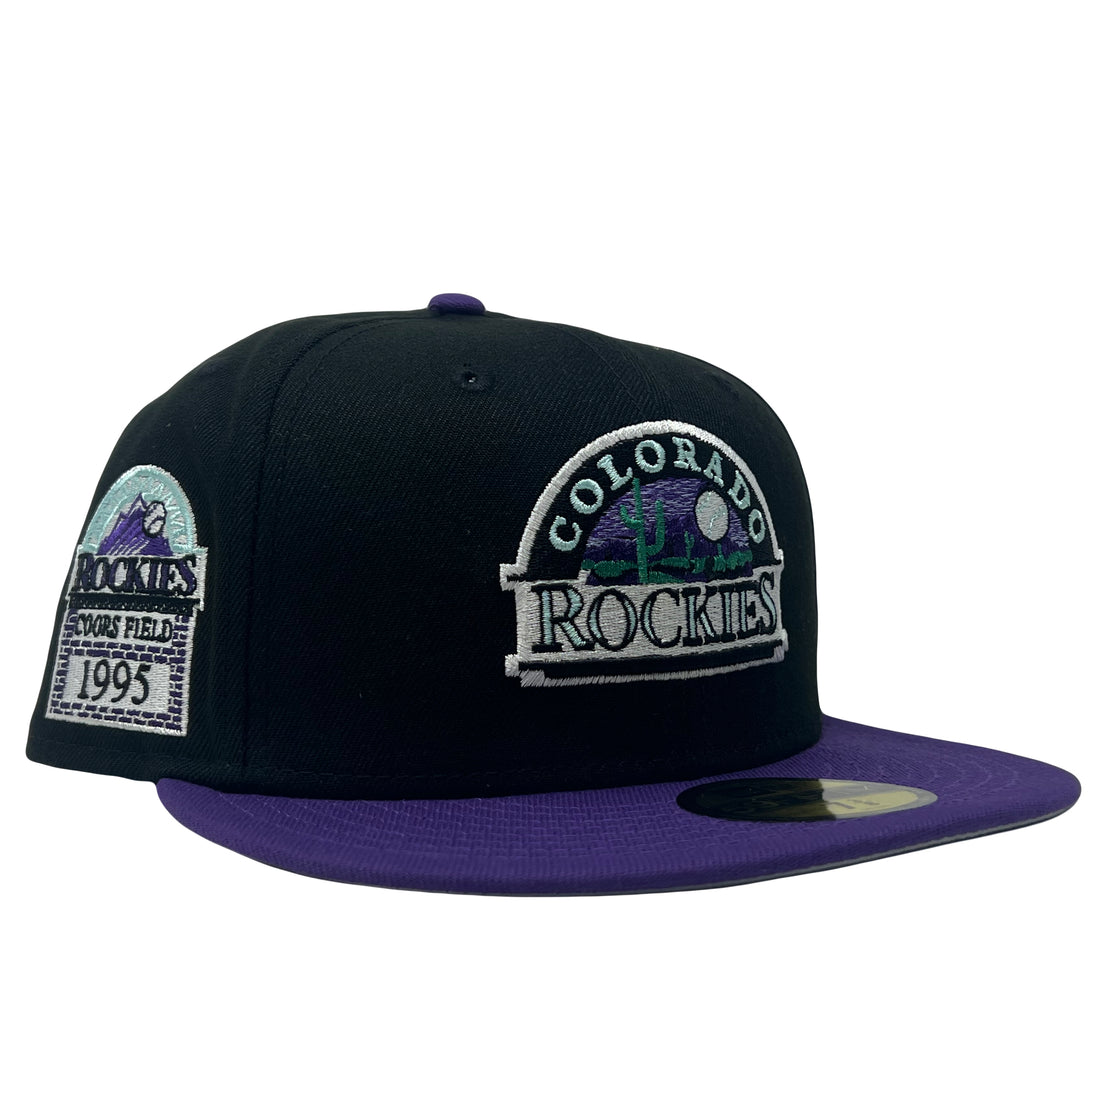 Colorado Rockies 1995 Coors Field 5950 New Era Fitted Hat